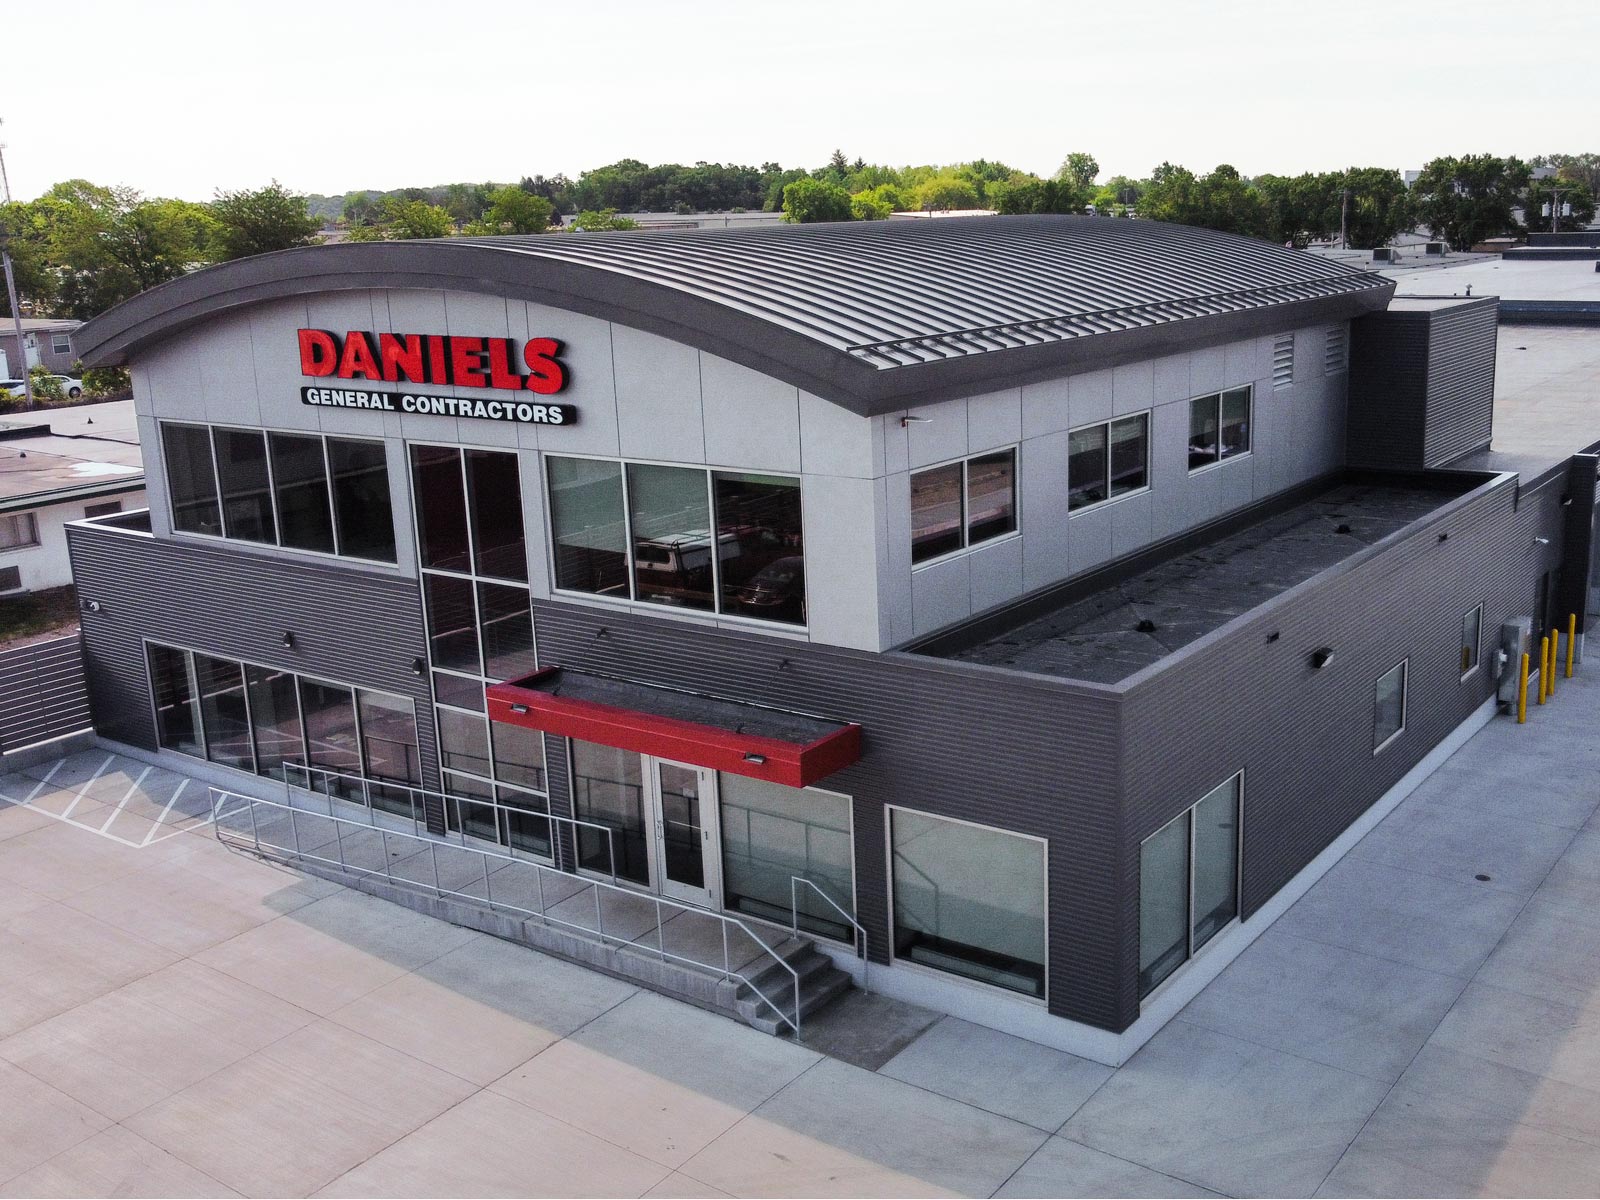 Daniels Construction headquarters remodel completed